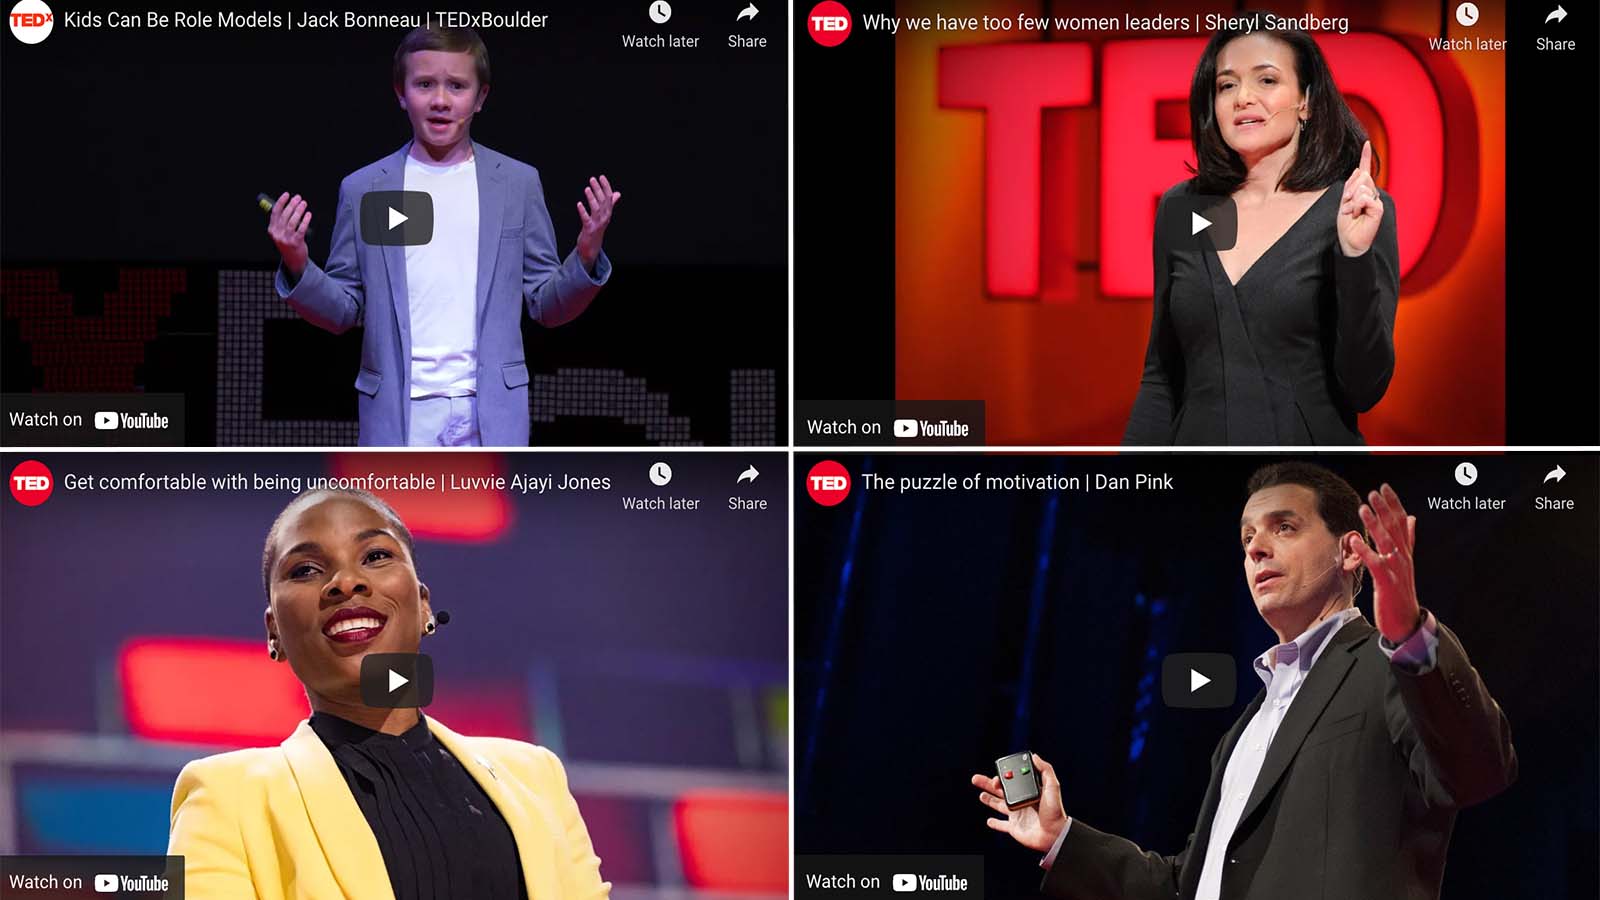 19 Inspiring Leadership TED Talks for Teachers and Students